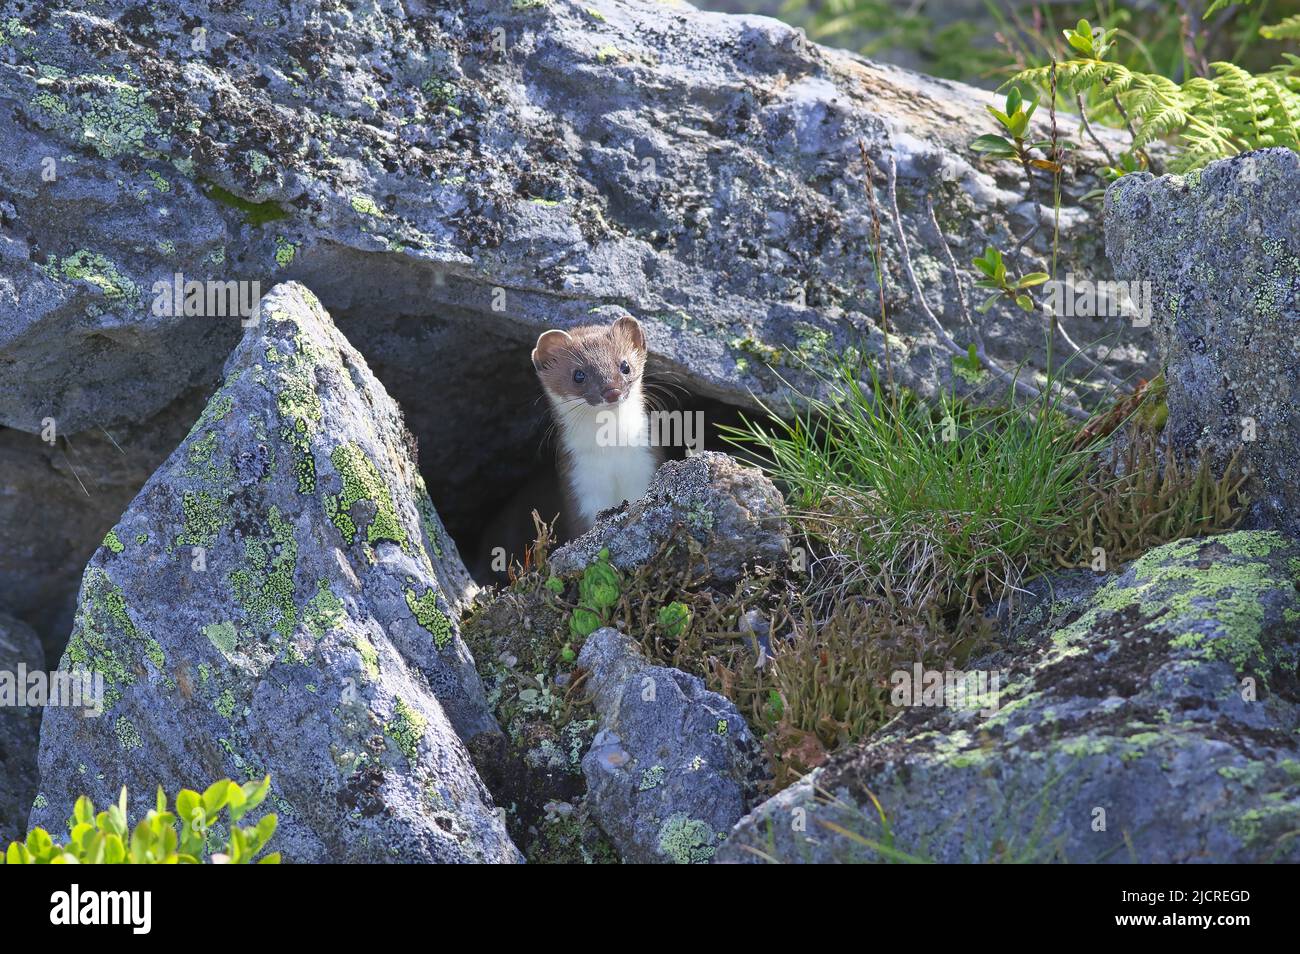 Stoat, Ermine (Mustela erminea) probably a young animal, looking out of a rock crevice. Alps, Austria Stock Photo